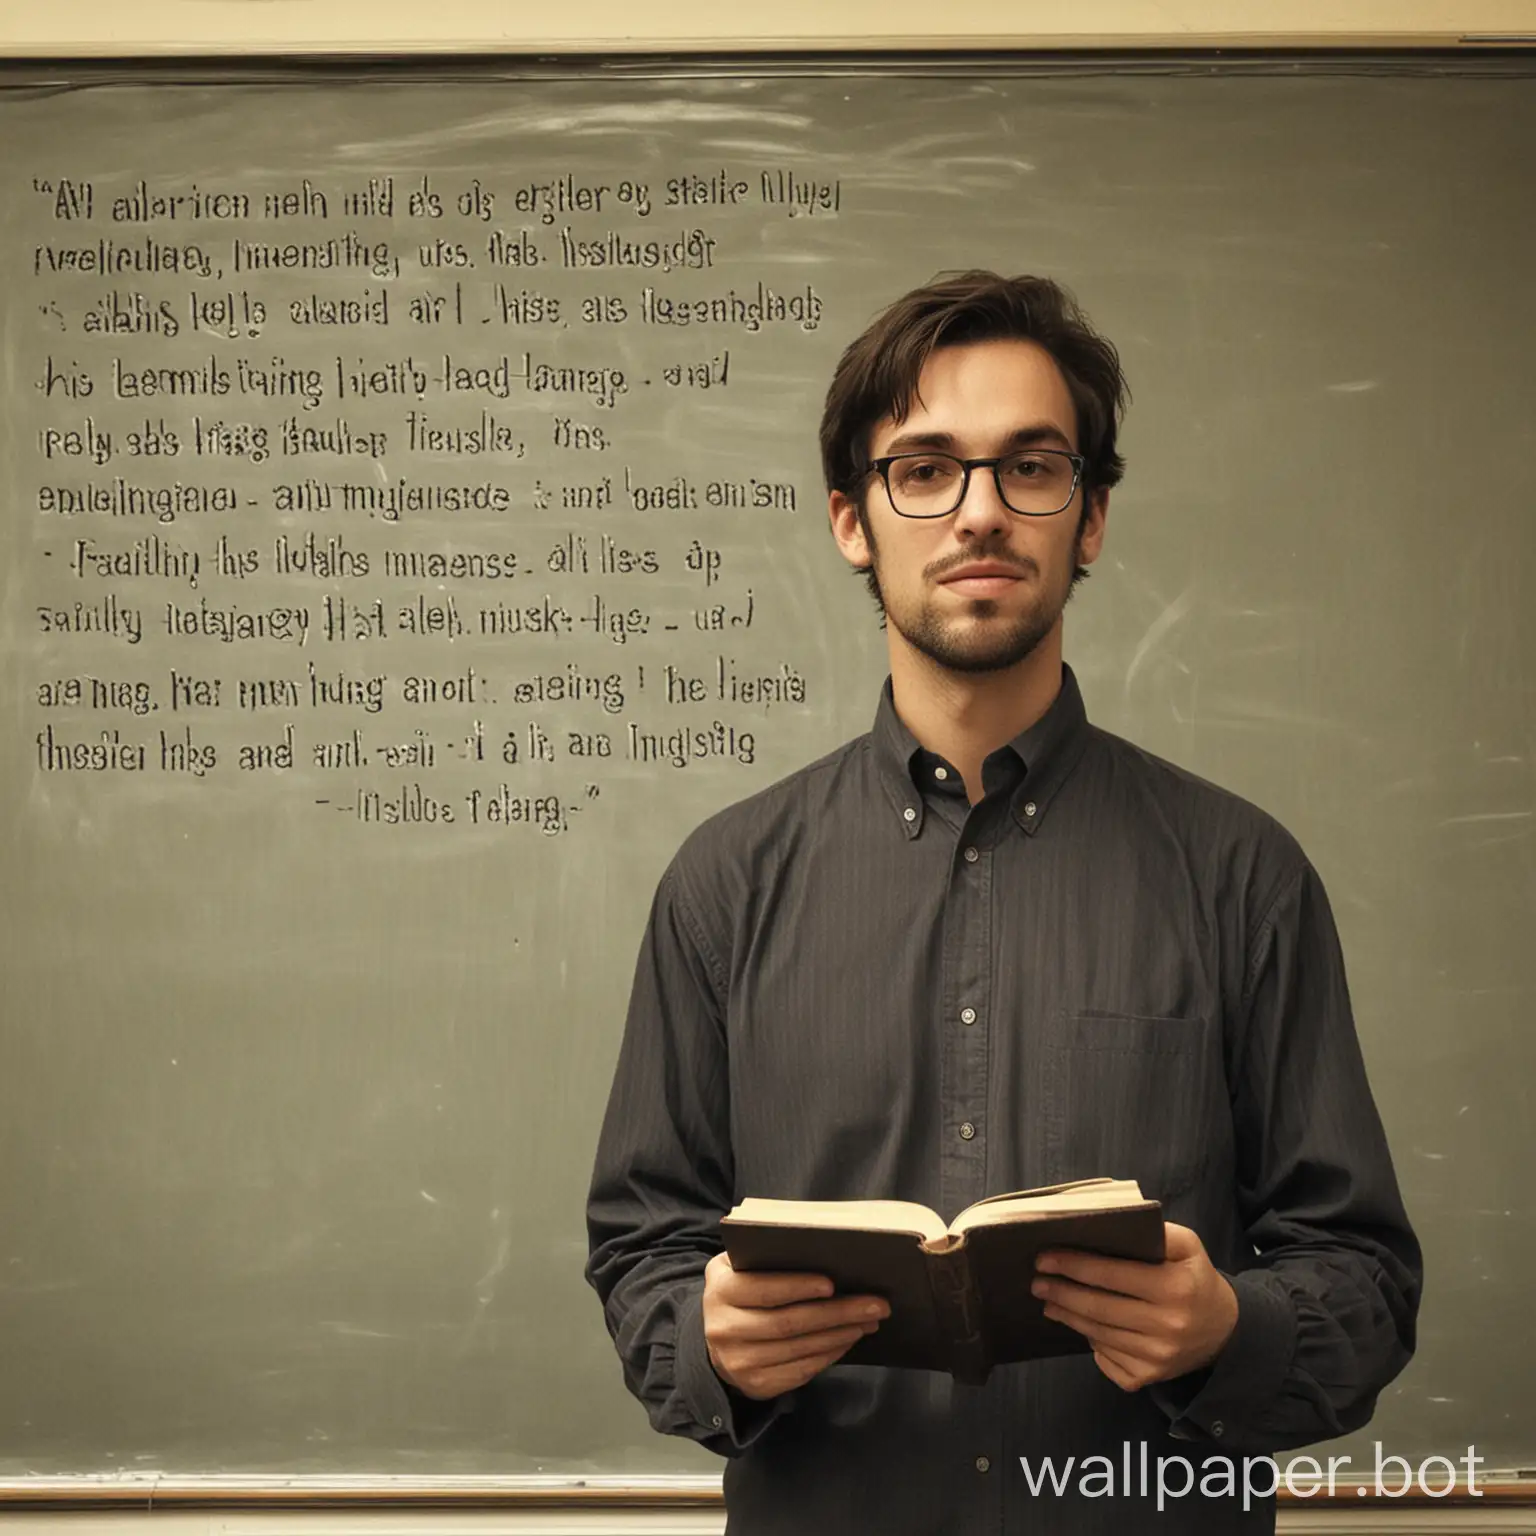 An American male teacher was introducing himself, telling about his family, his education and his work, and mentioning that he had kept up his hobbies of listening to music and reading books. 